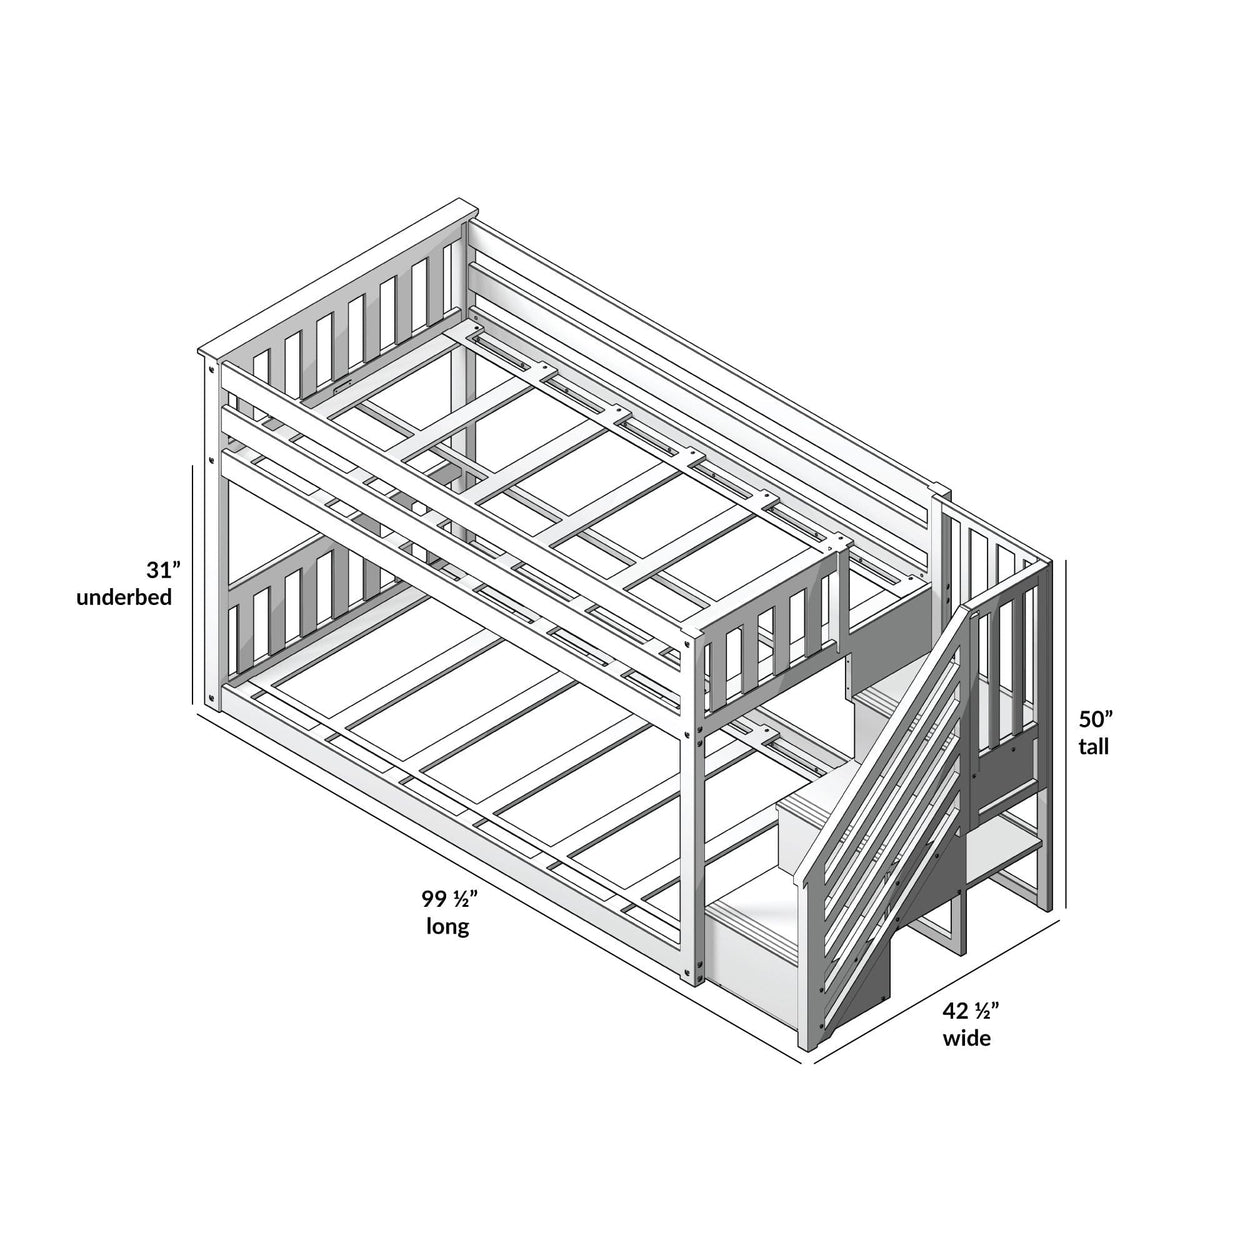 185220151209 : Bunk Beds Low Bunk with Stairs and Two Guard Rails, Clay